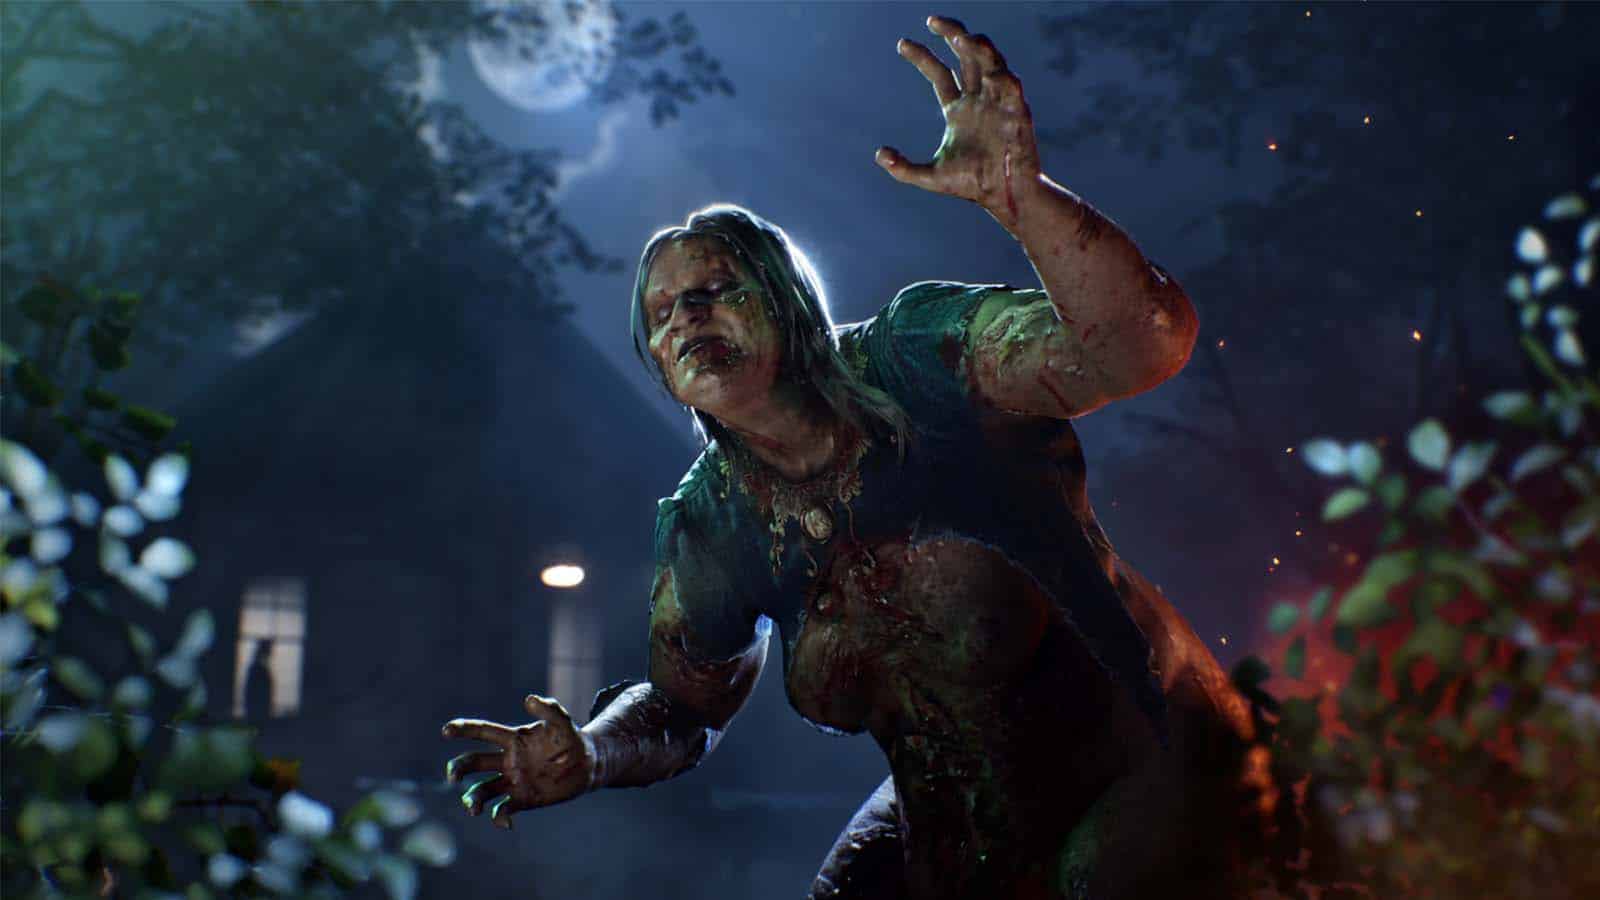 Evil Dead The Game Update 1.40 Patch Notes, Player Count